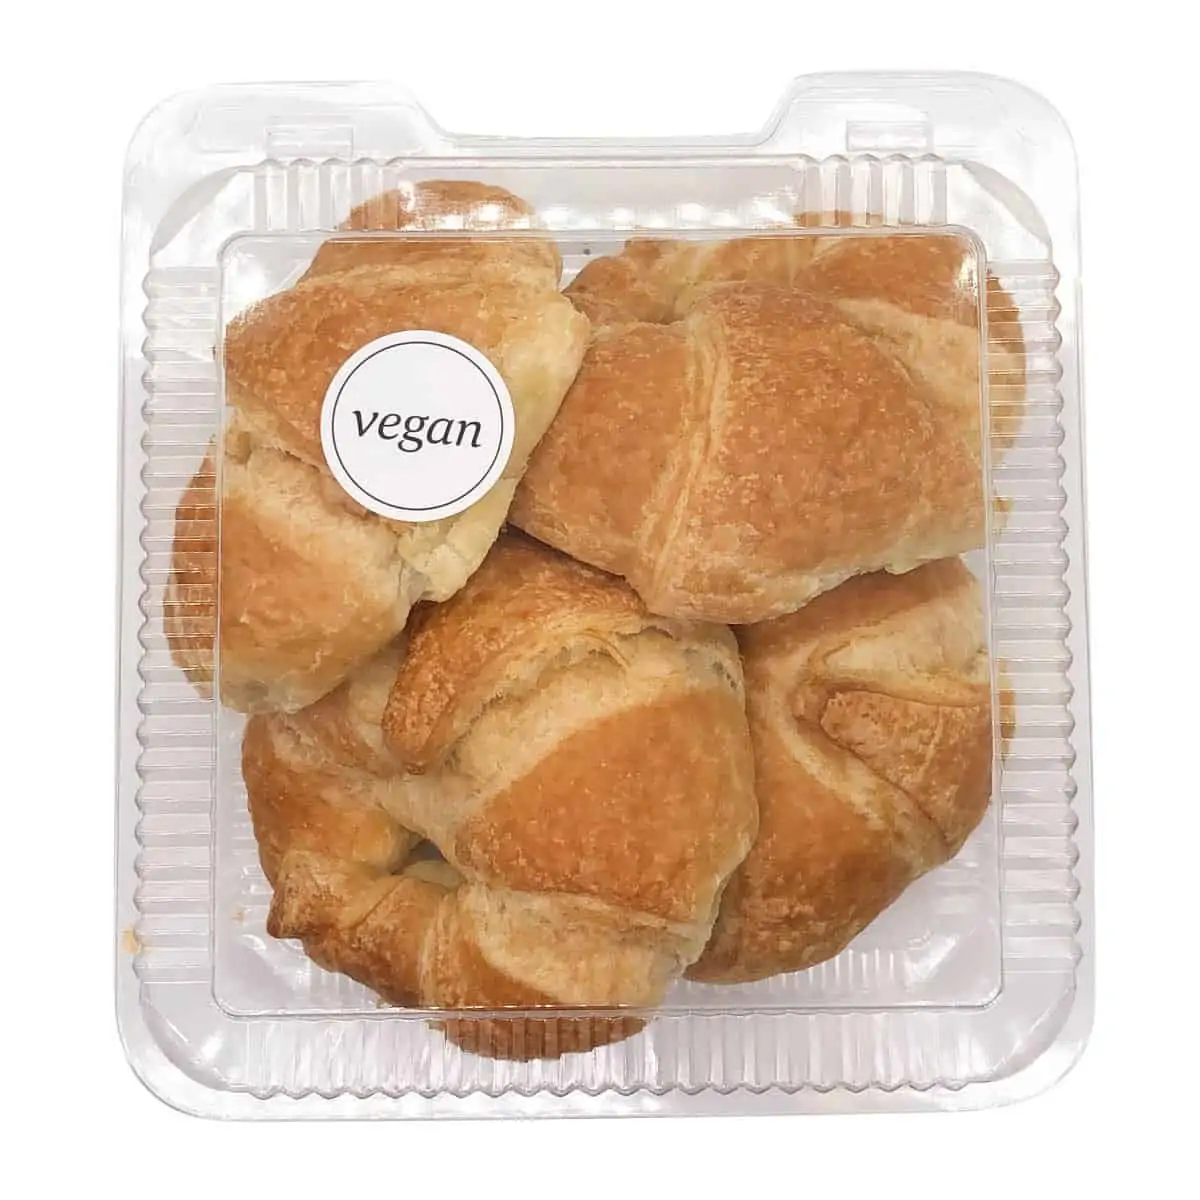 a plastic container filled with dairy-free vegan croissants from whole foods market